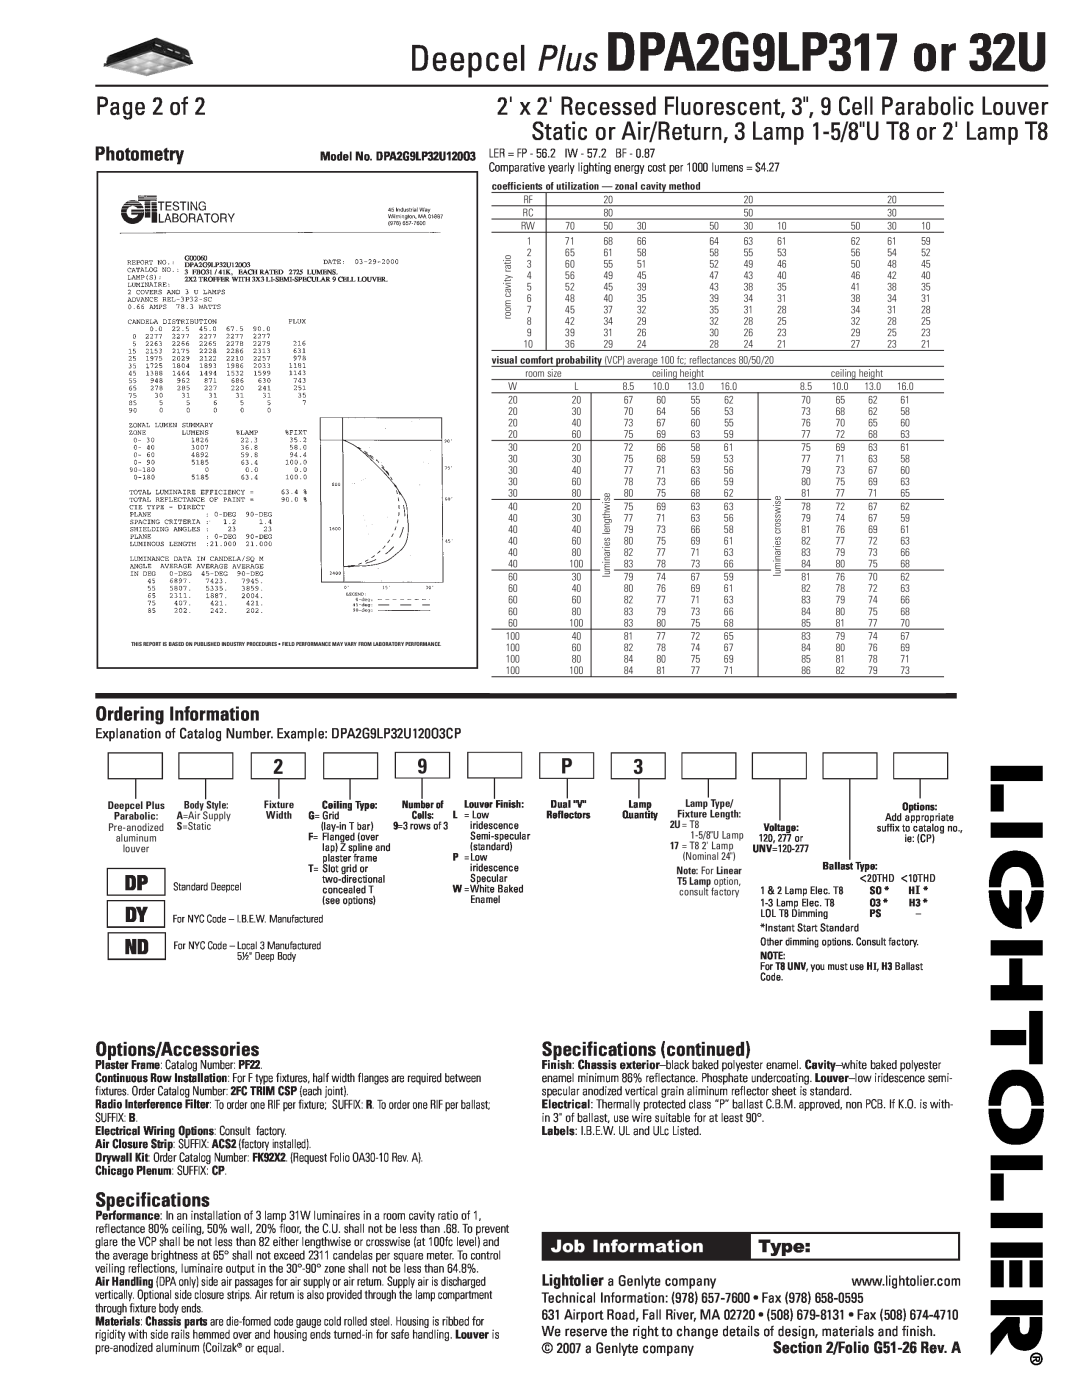 Lightolier DPA2G9LP317 Page 2 of, Photometry, Ordering Information, Options/Accessories, Specifications continued, Type 